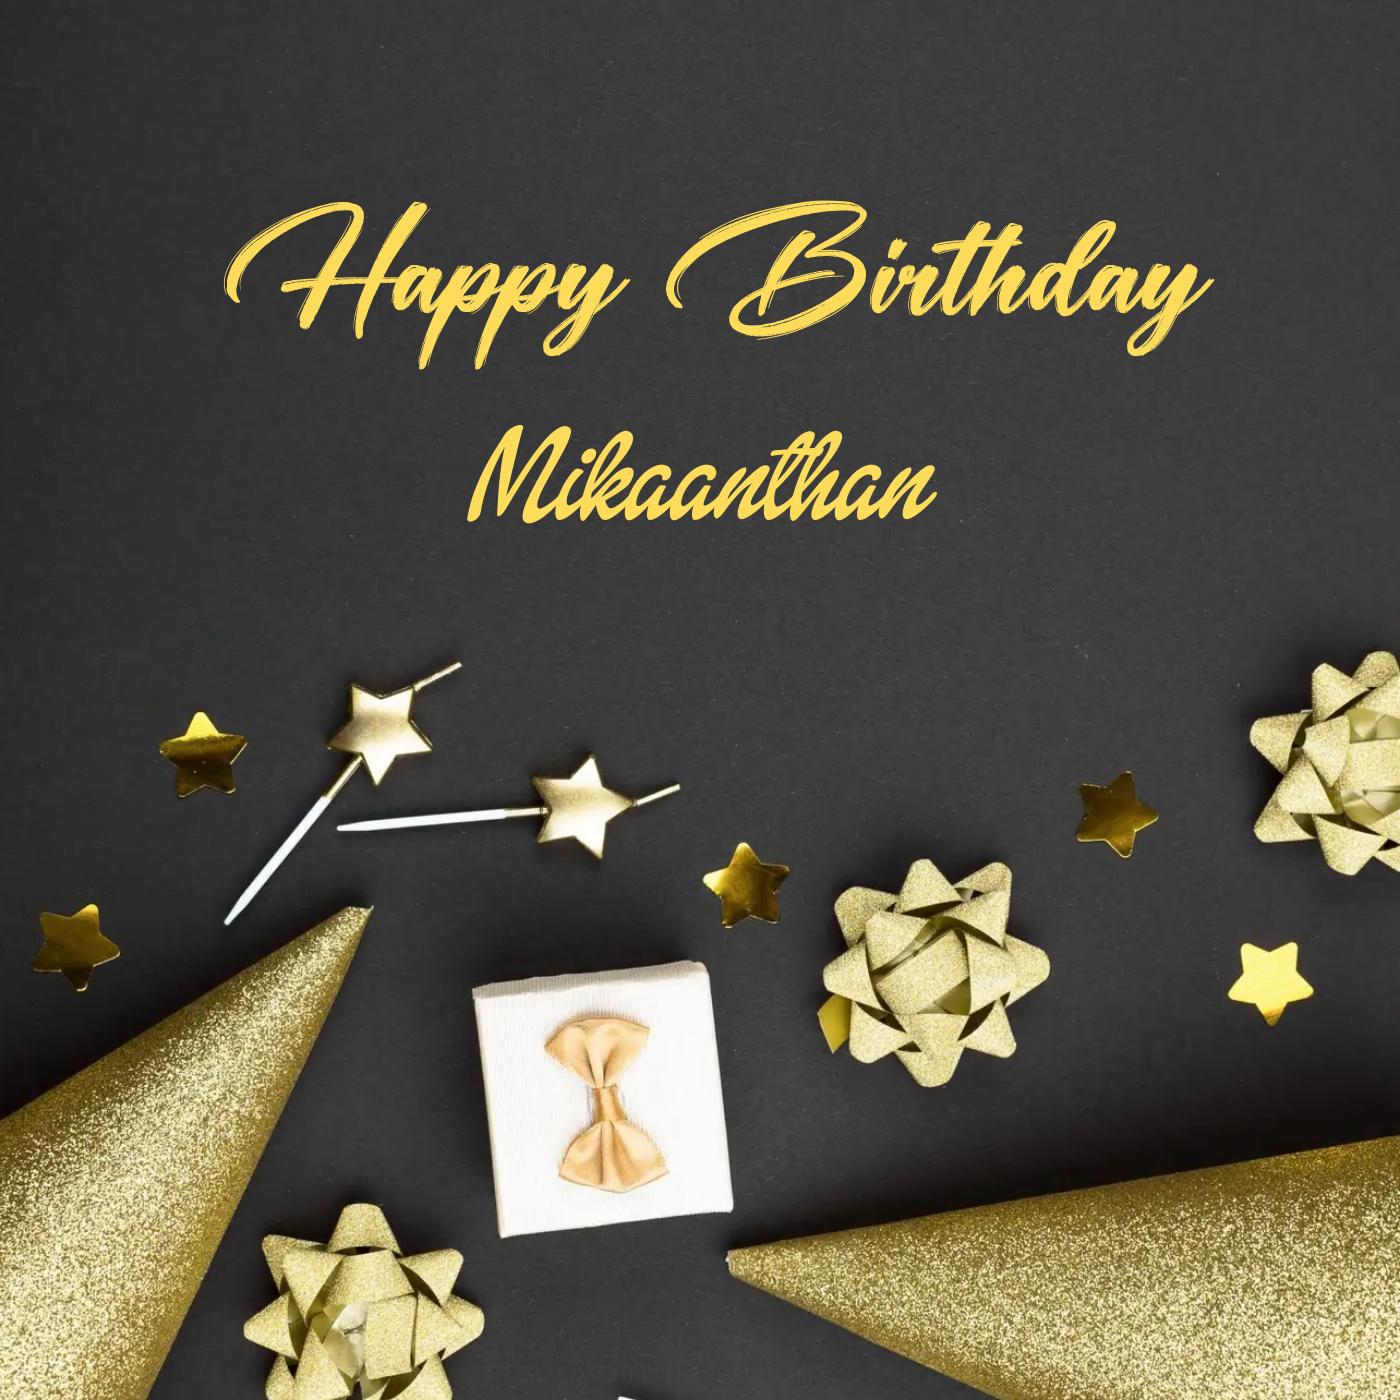 Happy Birthday Mikaanthan Golden Theme Card